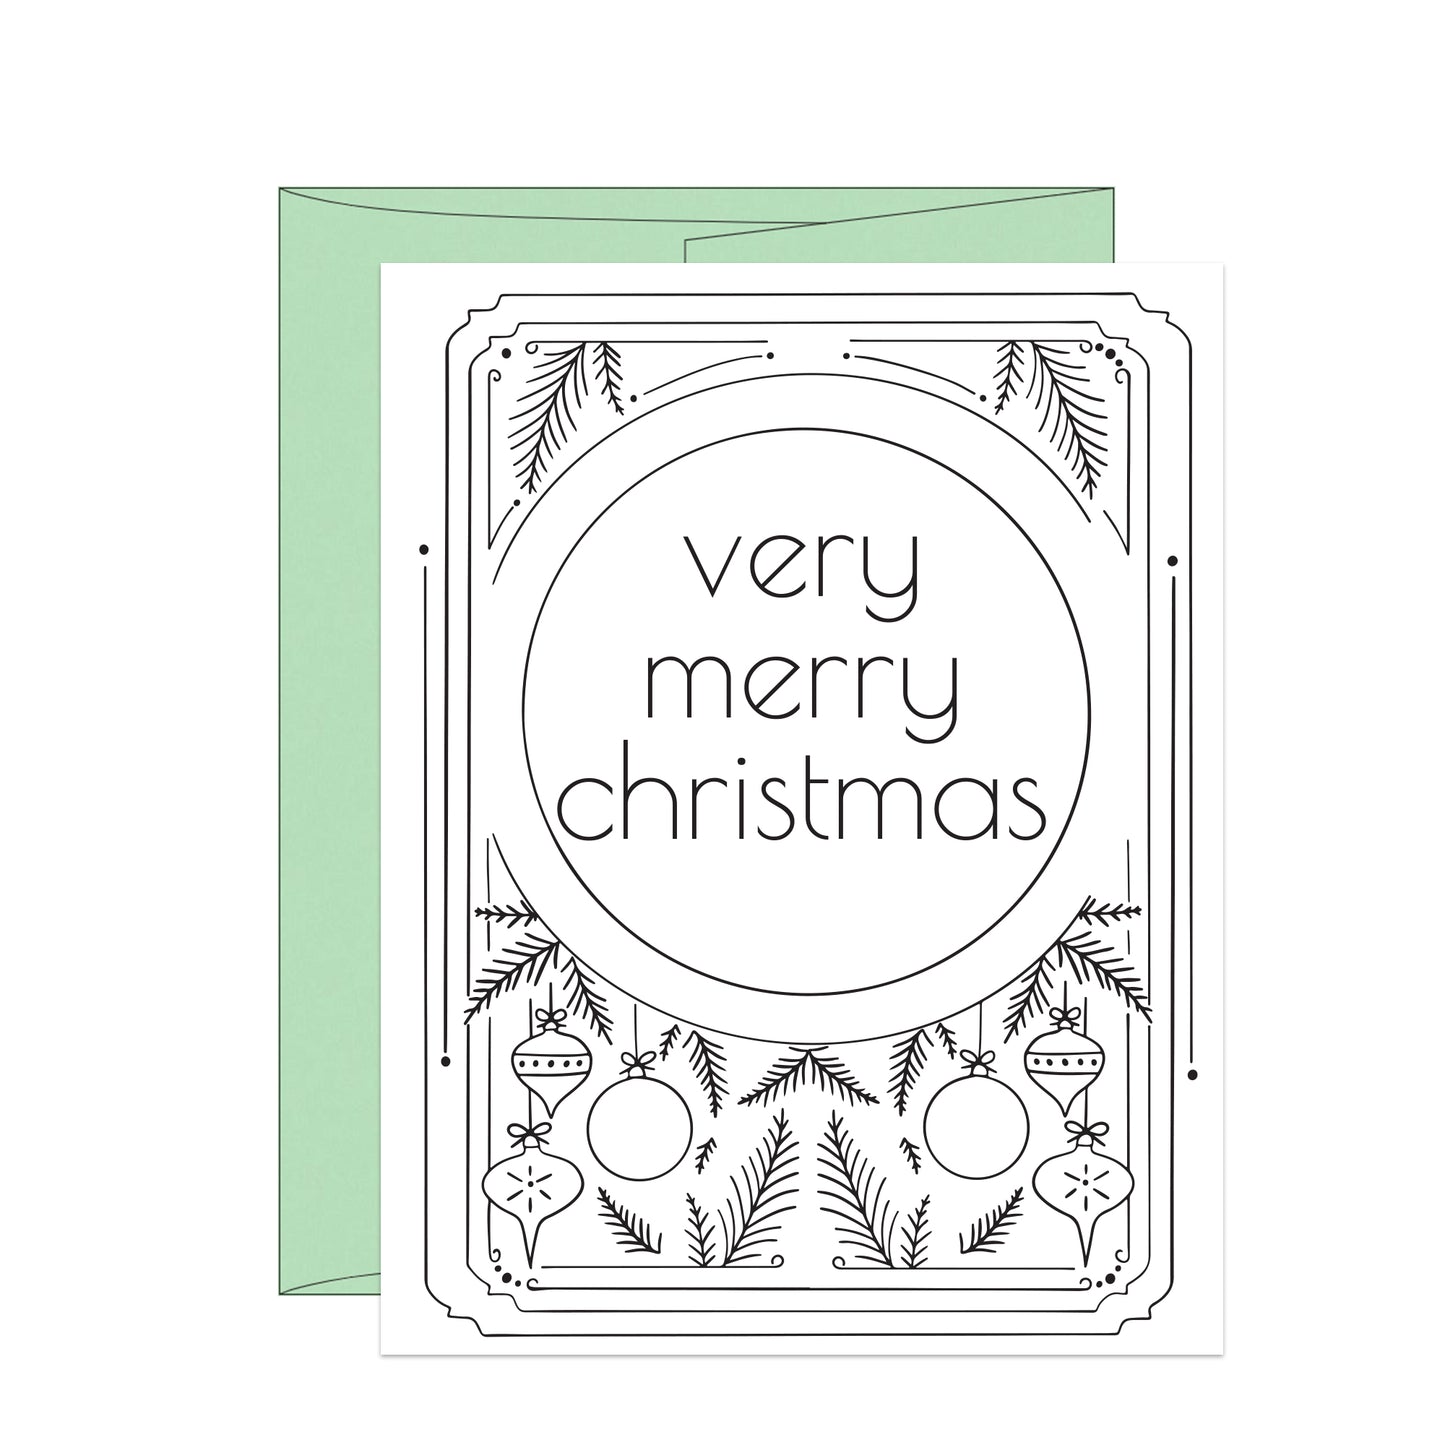 A DIY color me in Christmas card